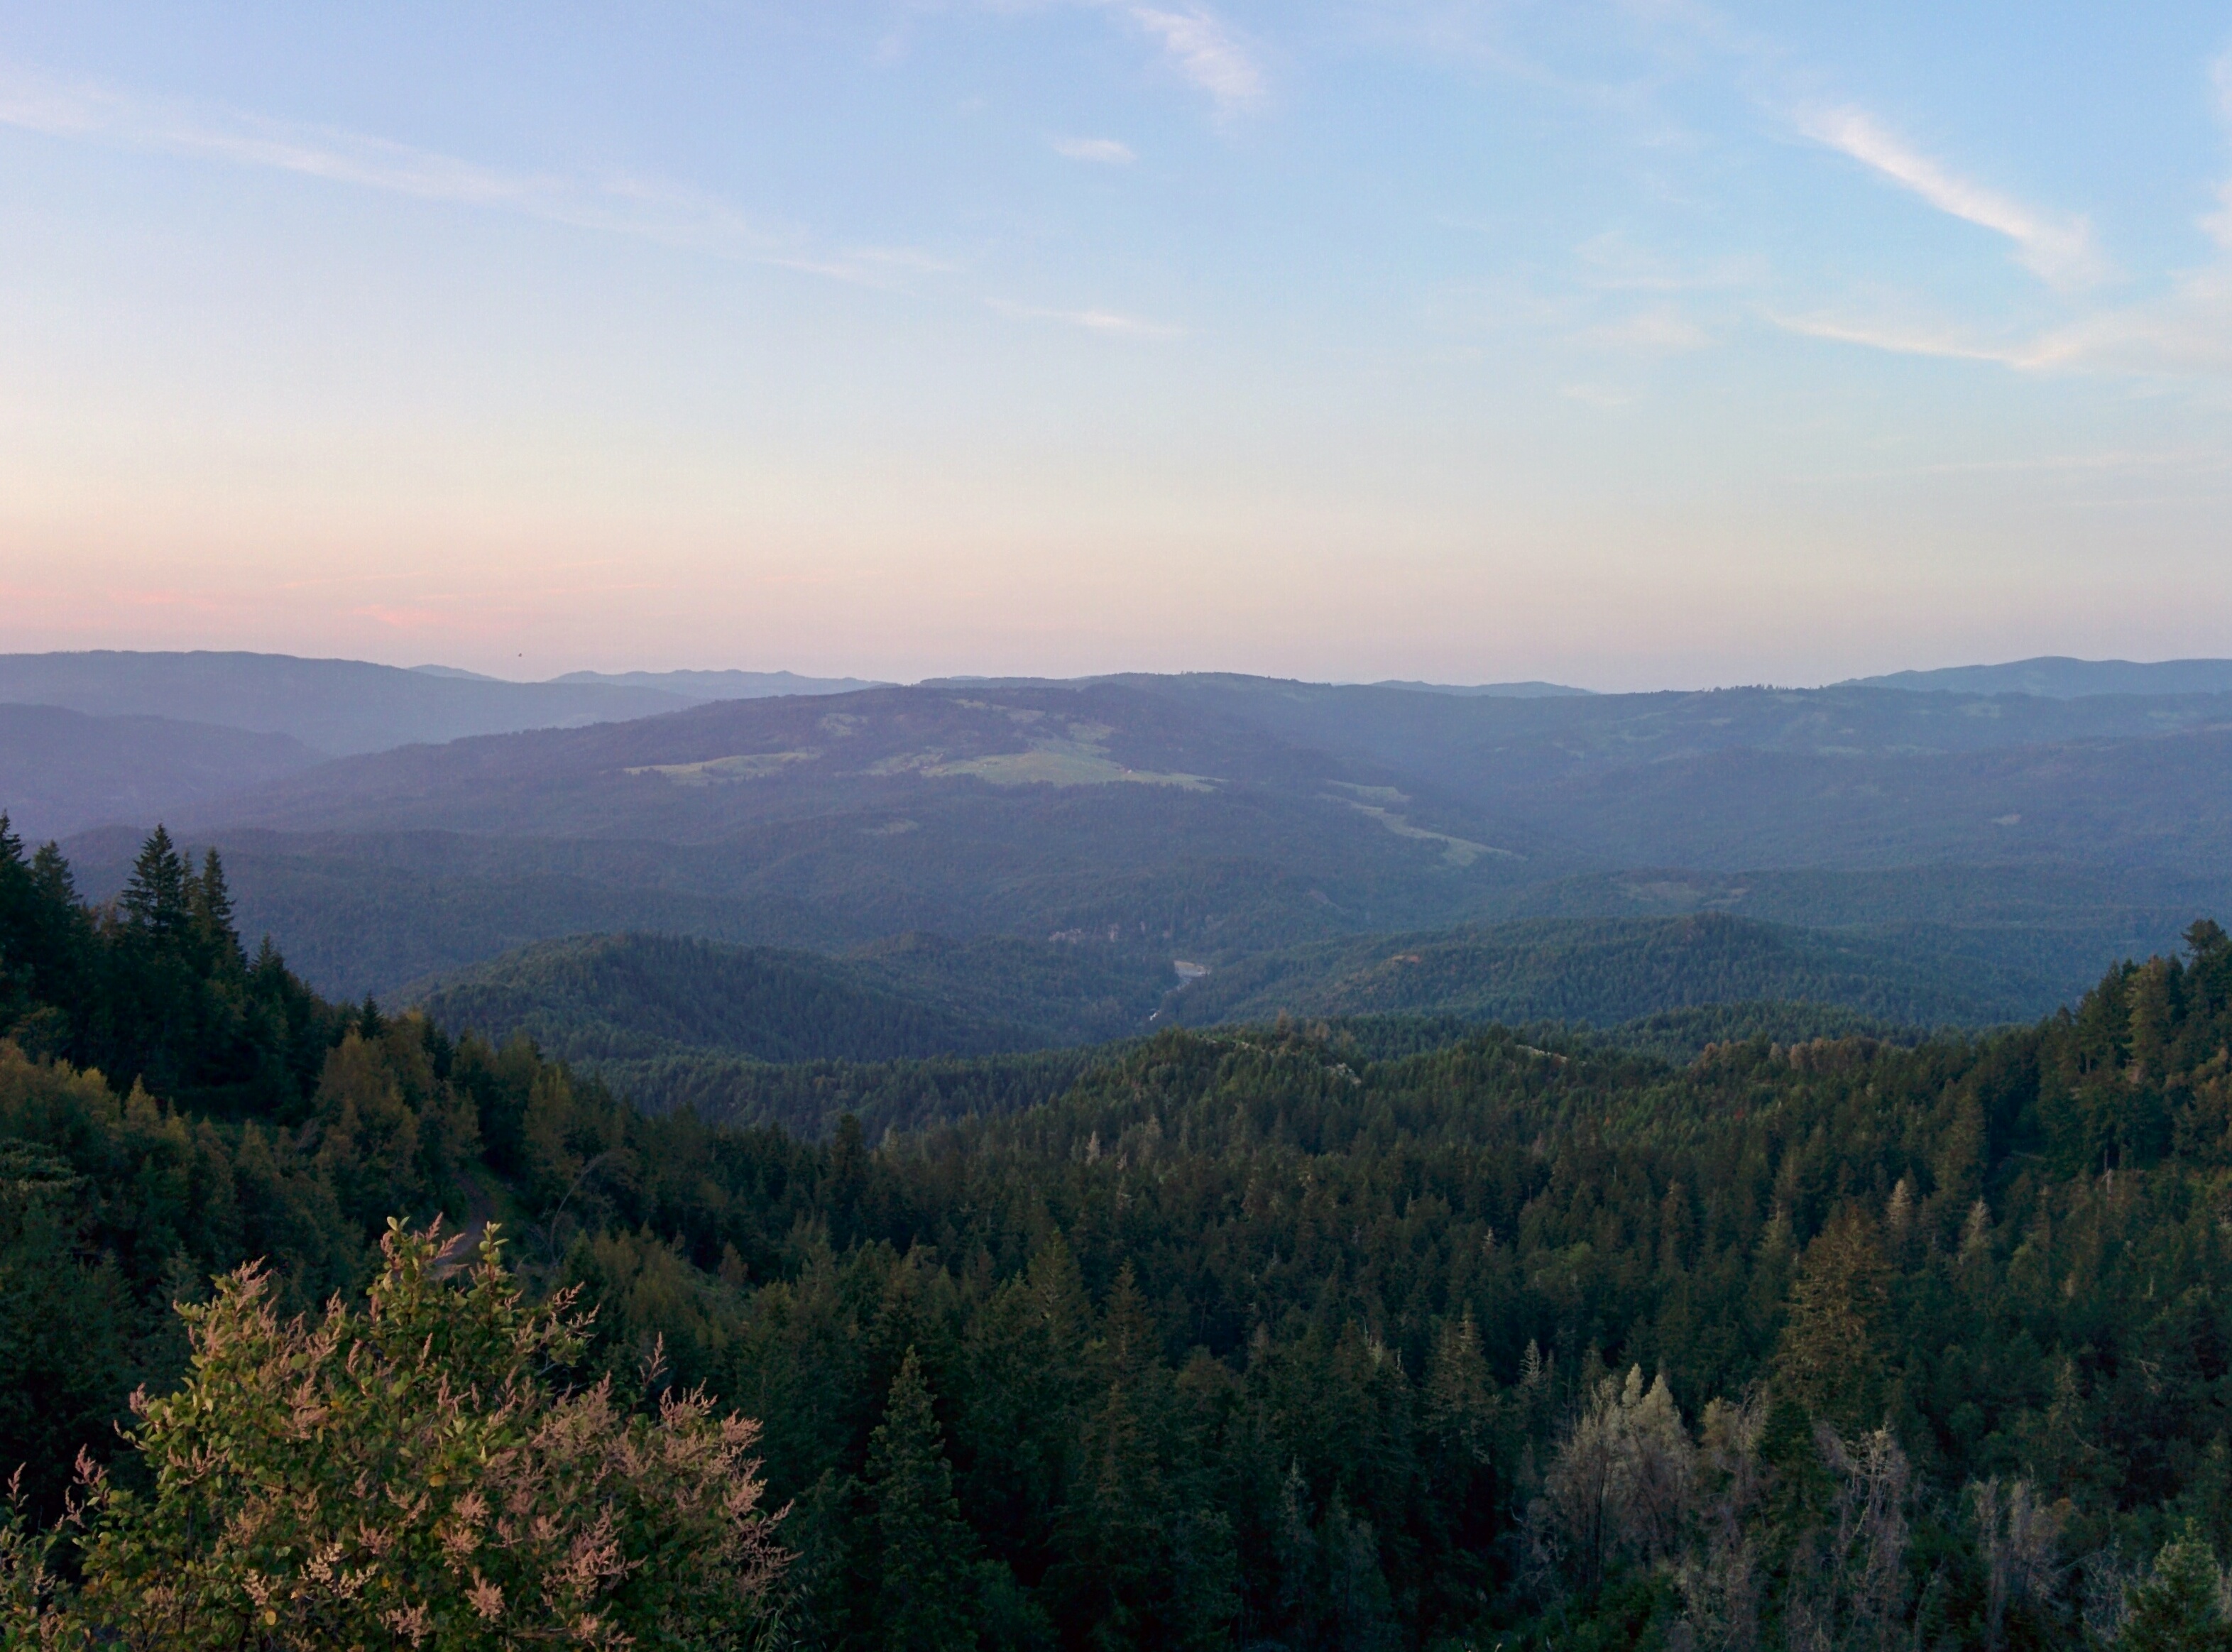 View in Humboldt County in May of 2016